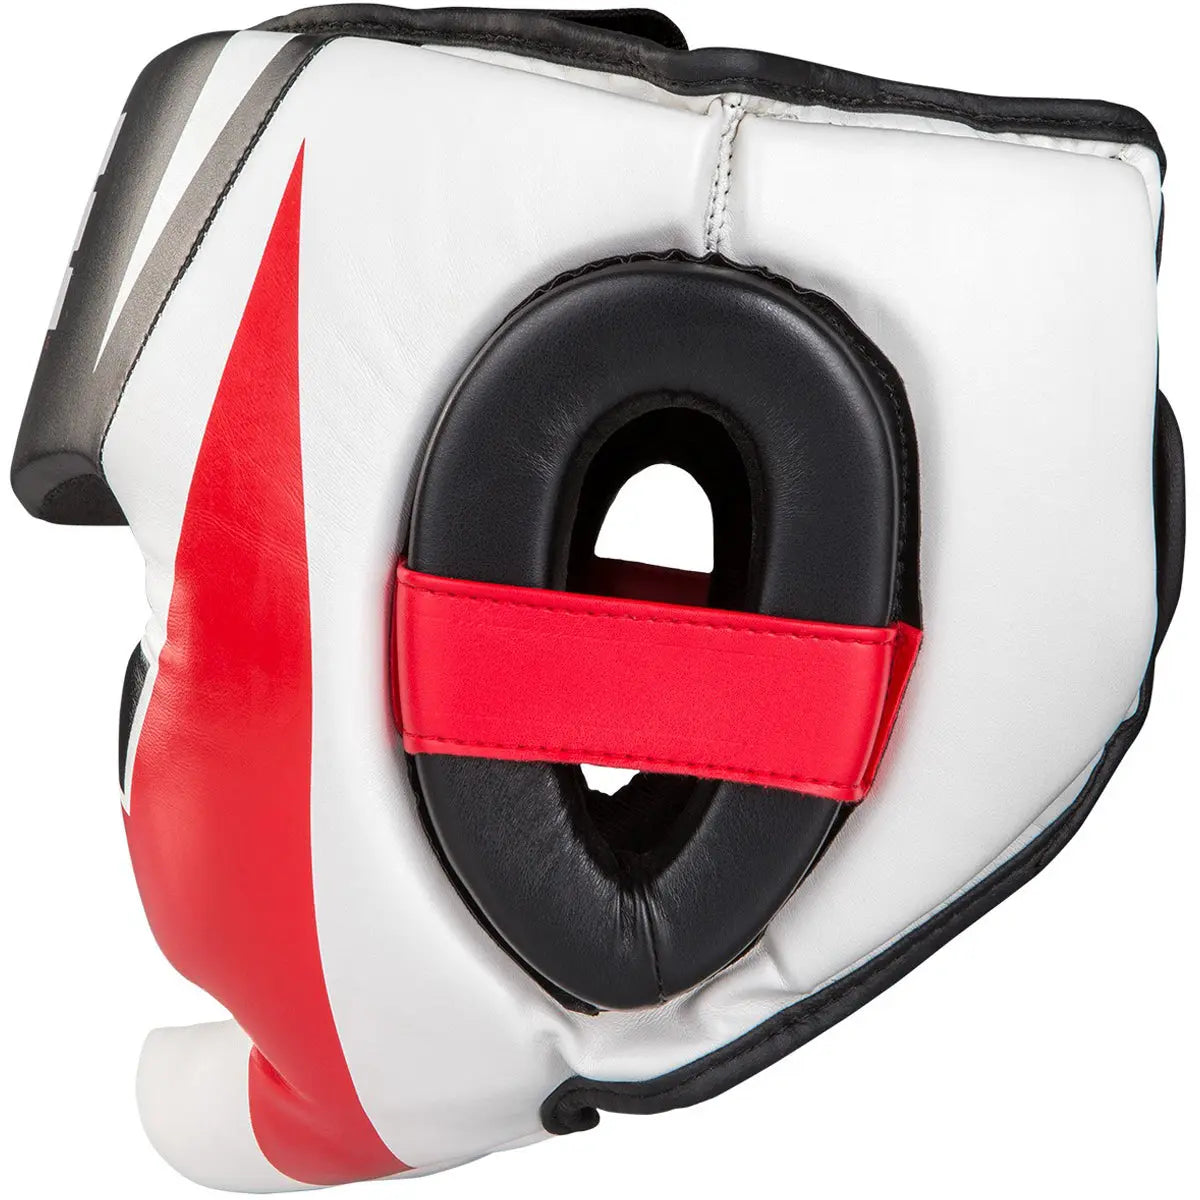 Title Boxing Command Lightweight Full-Face Training Headgear - Black/White/Red Title Boxing